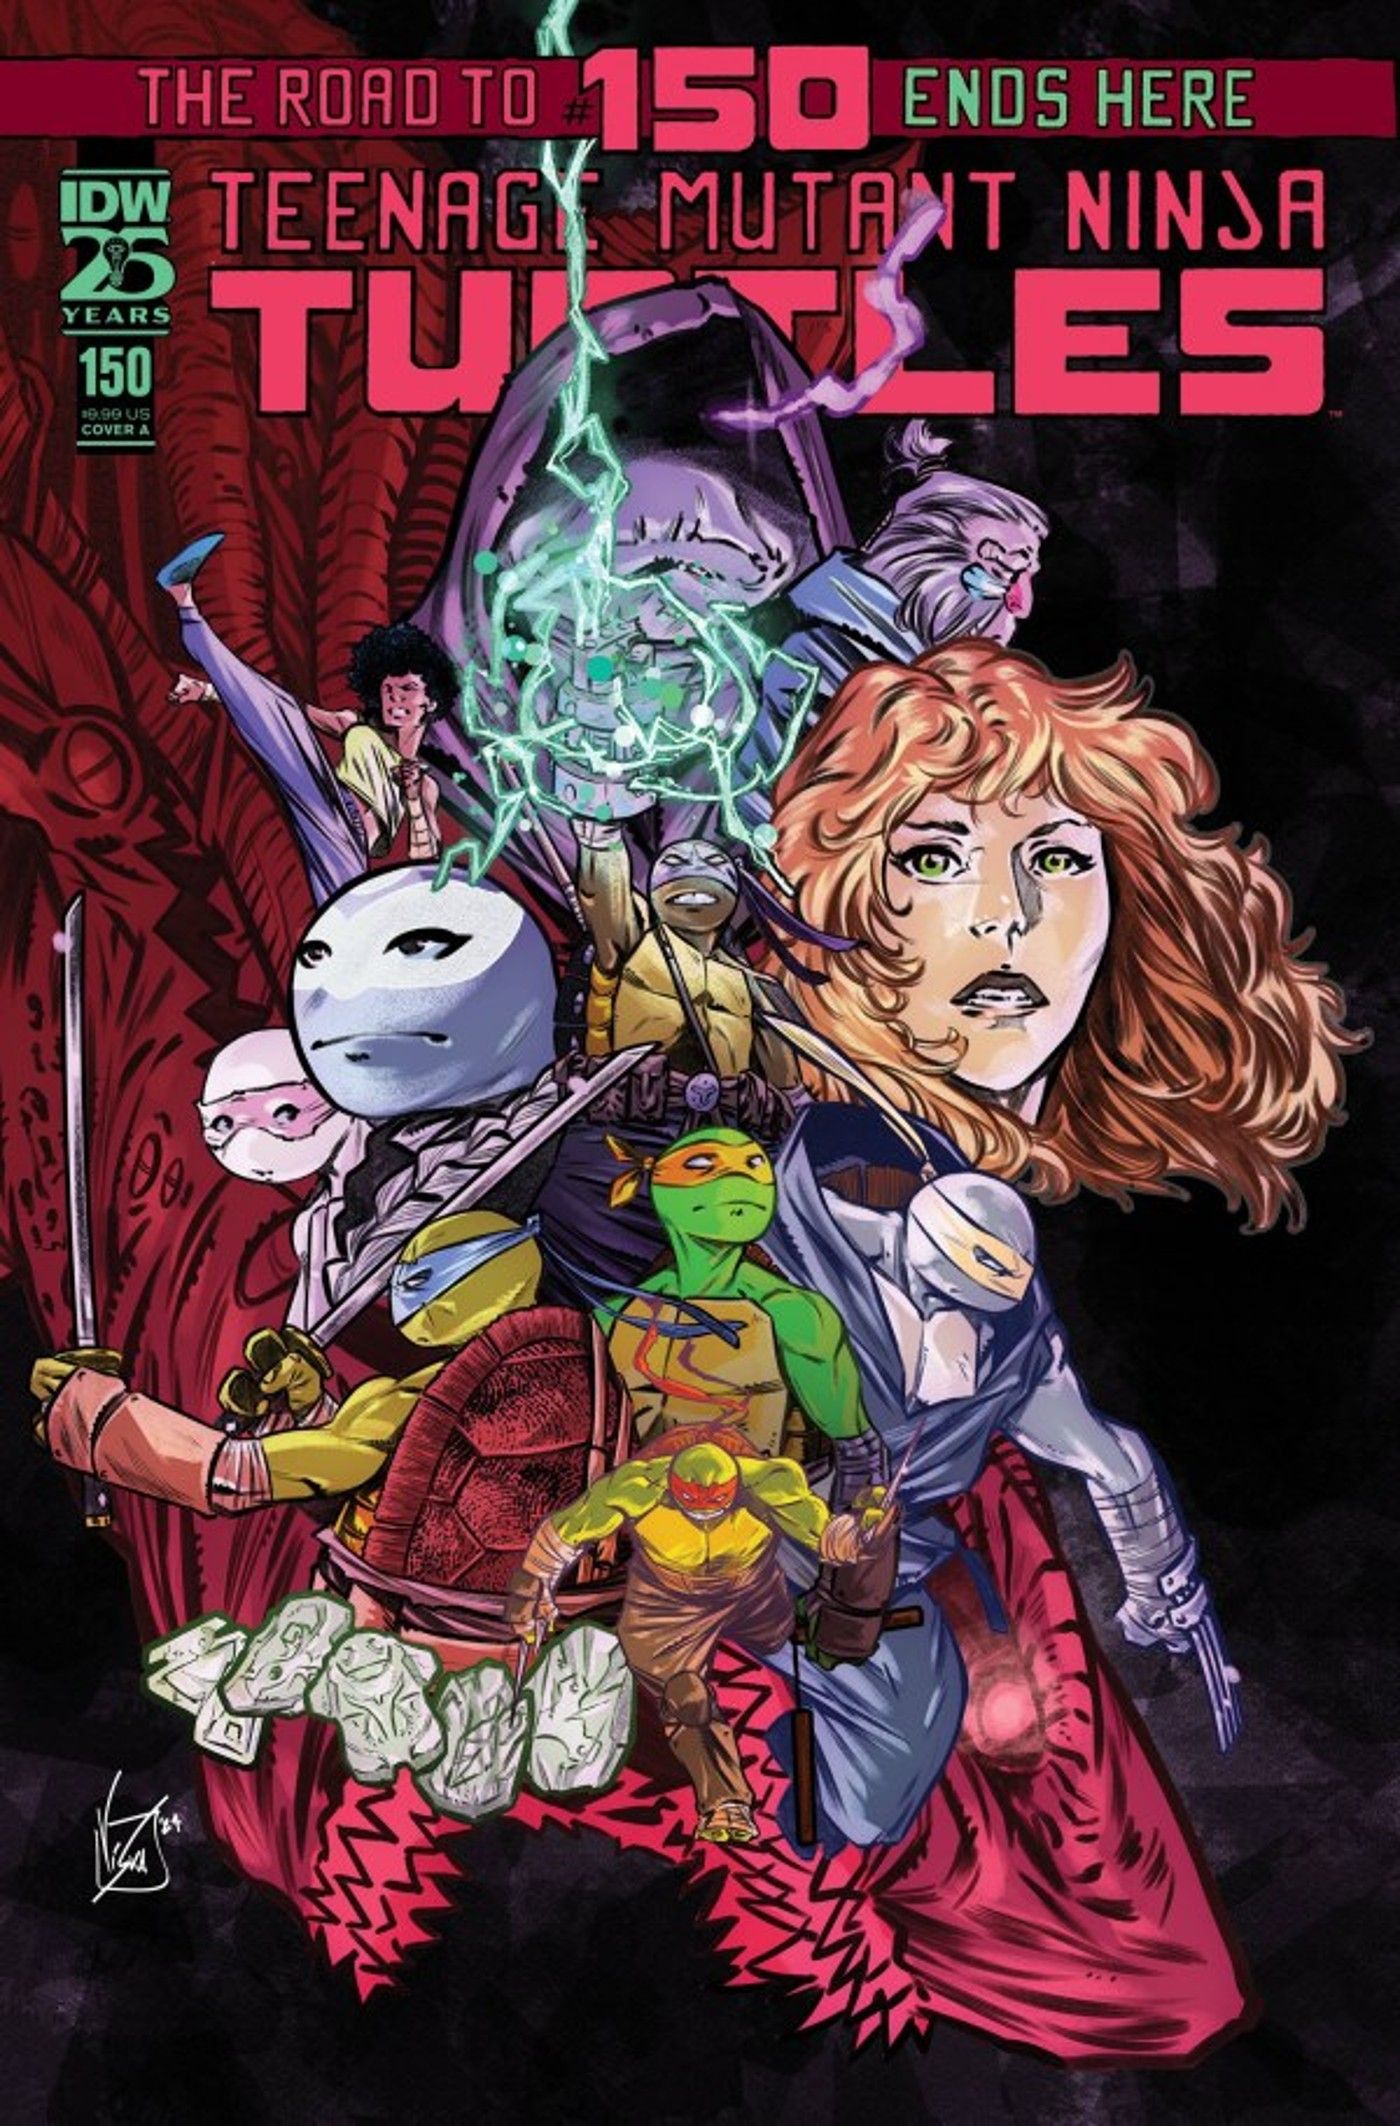 TMNT Officially Debuts Donatello’s Children, With Their Own Matching Names